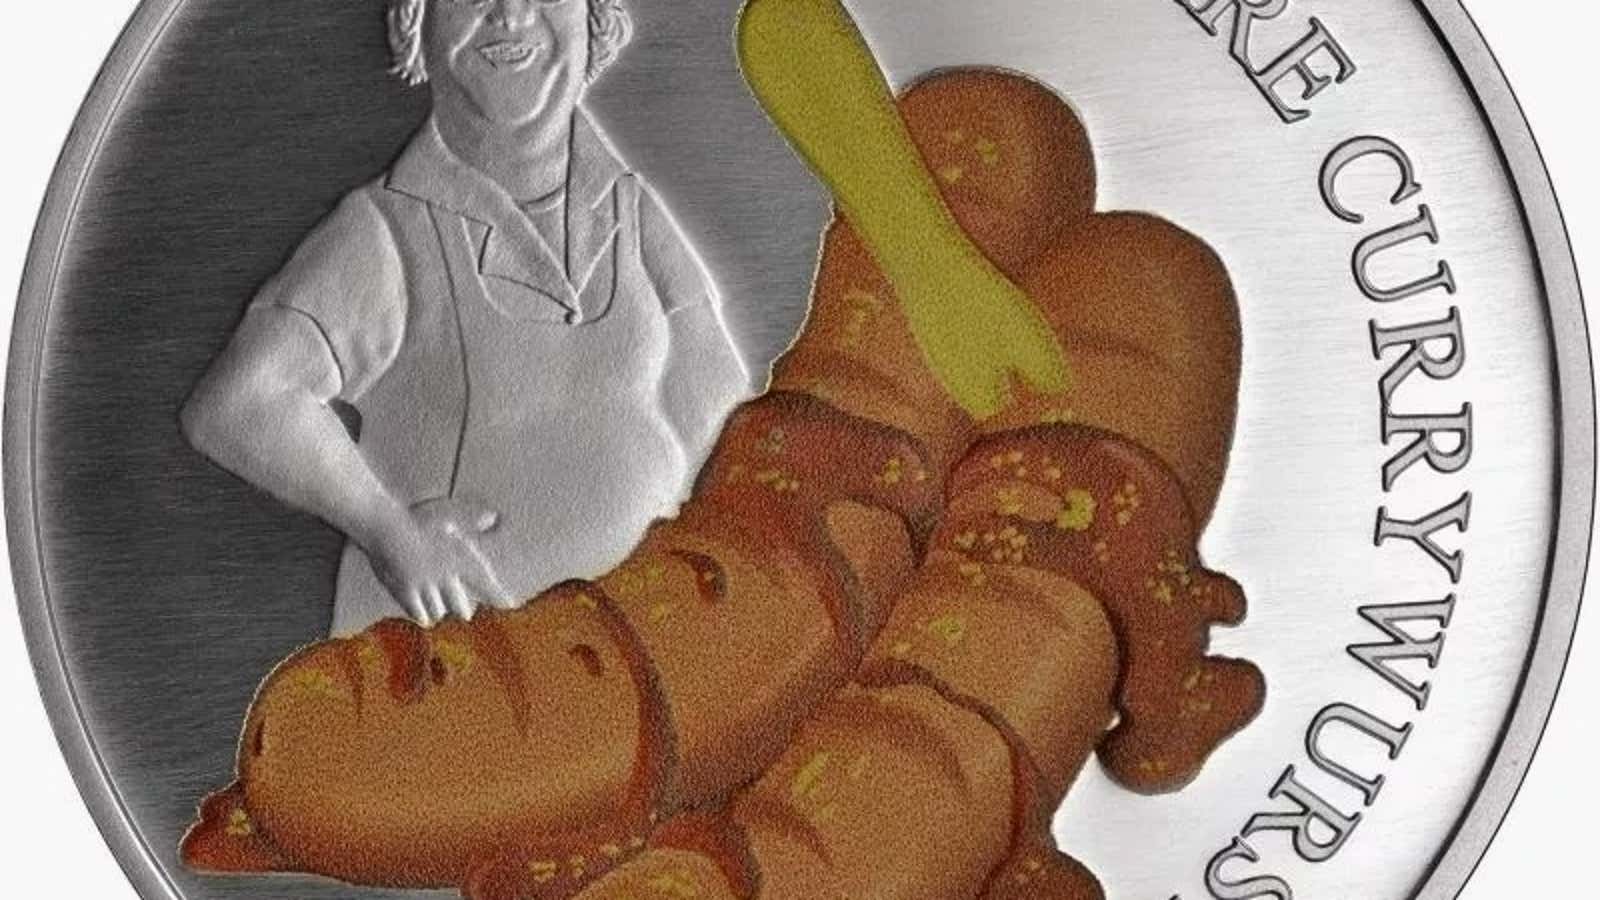 The sausages are depicted in an all-too-realistic shade of brown.